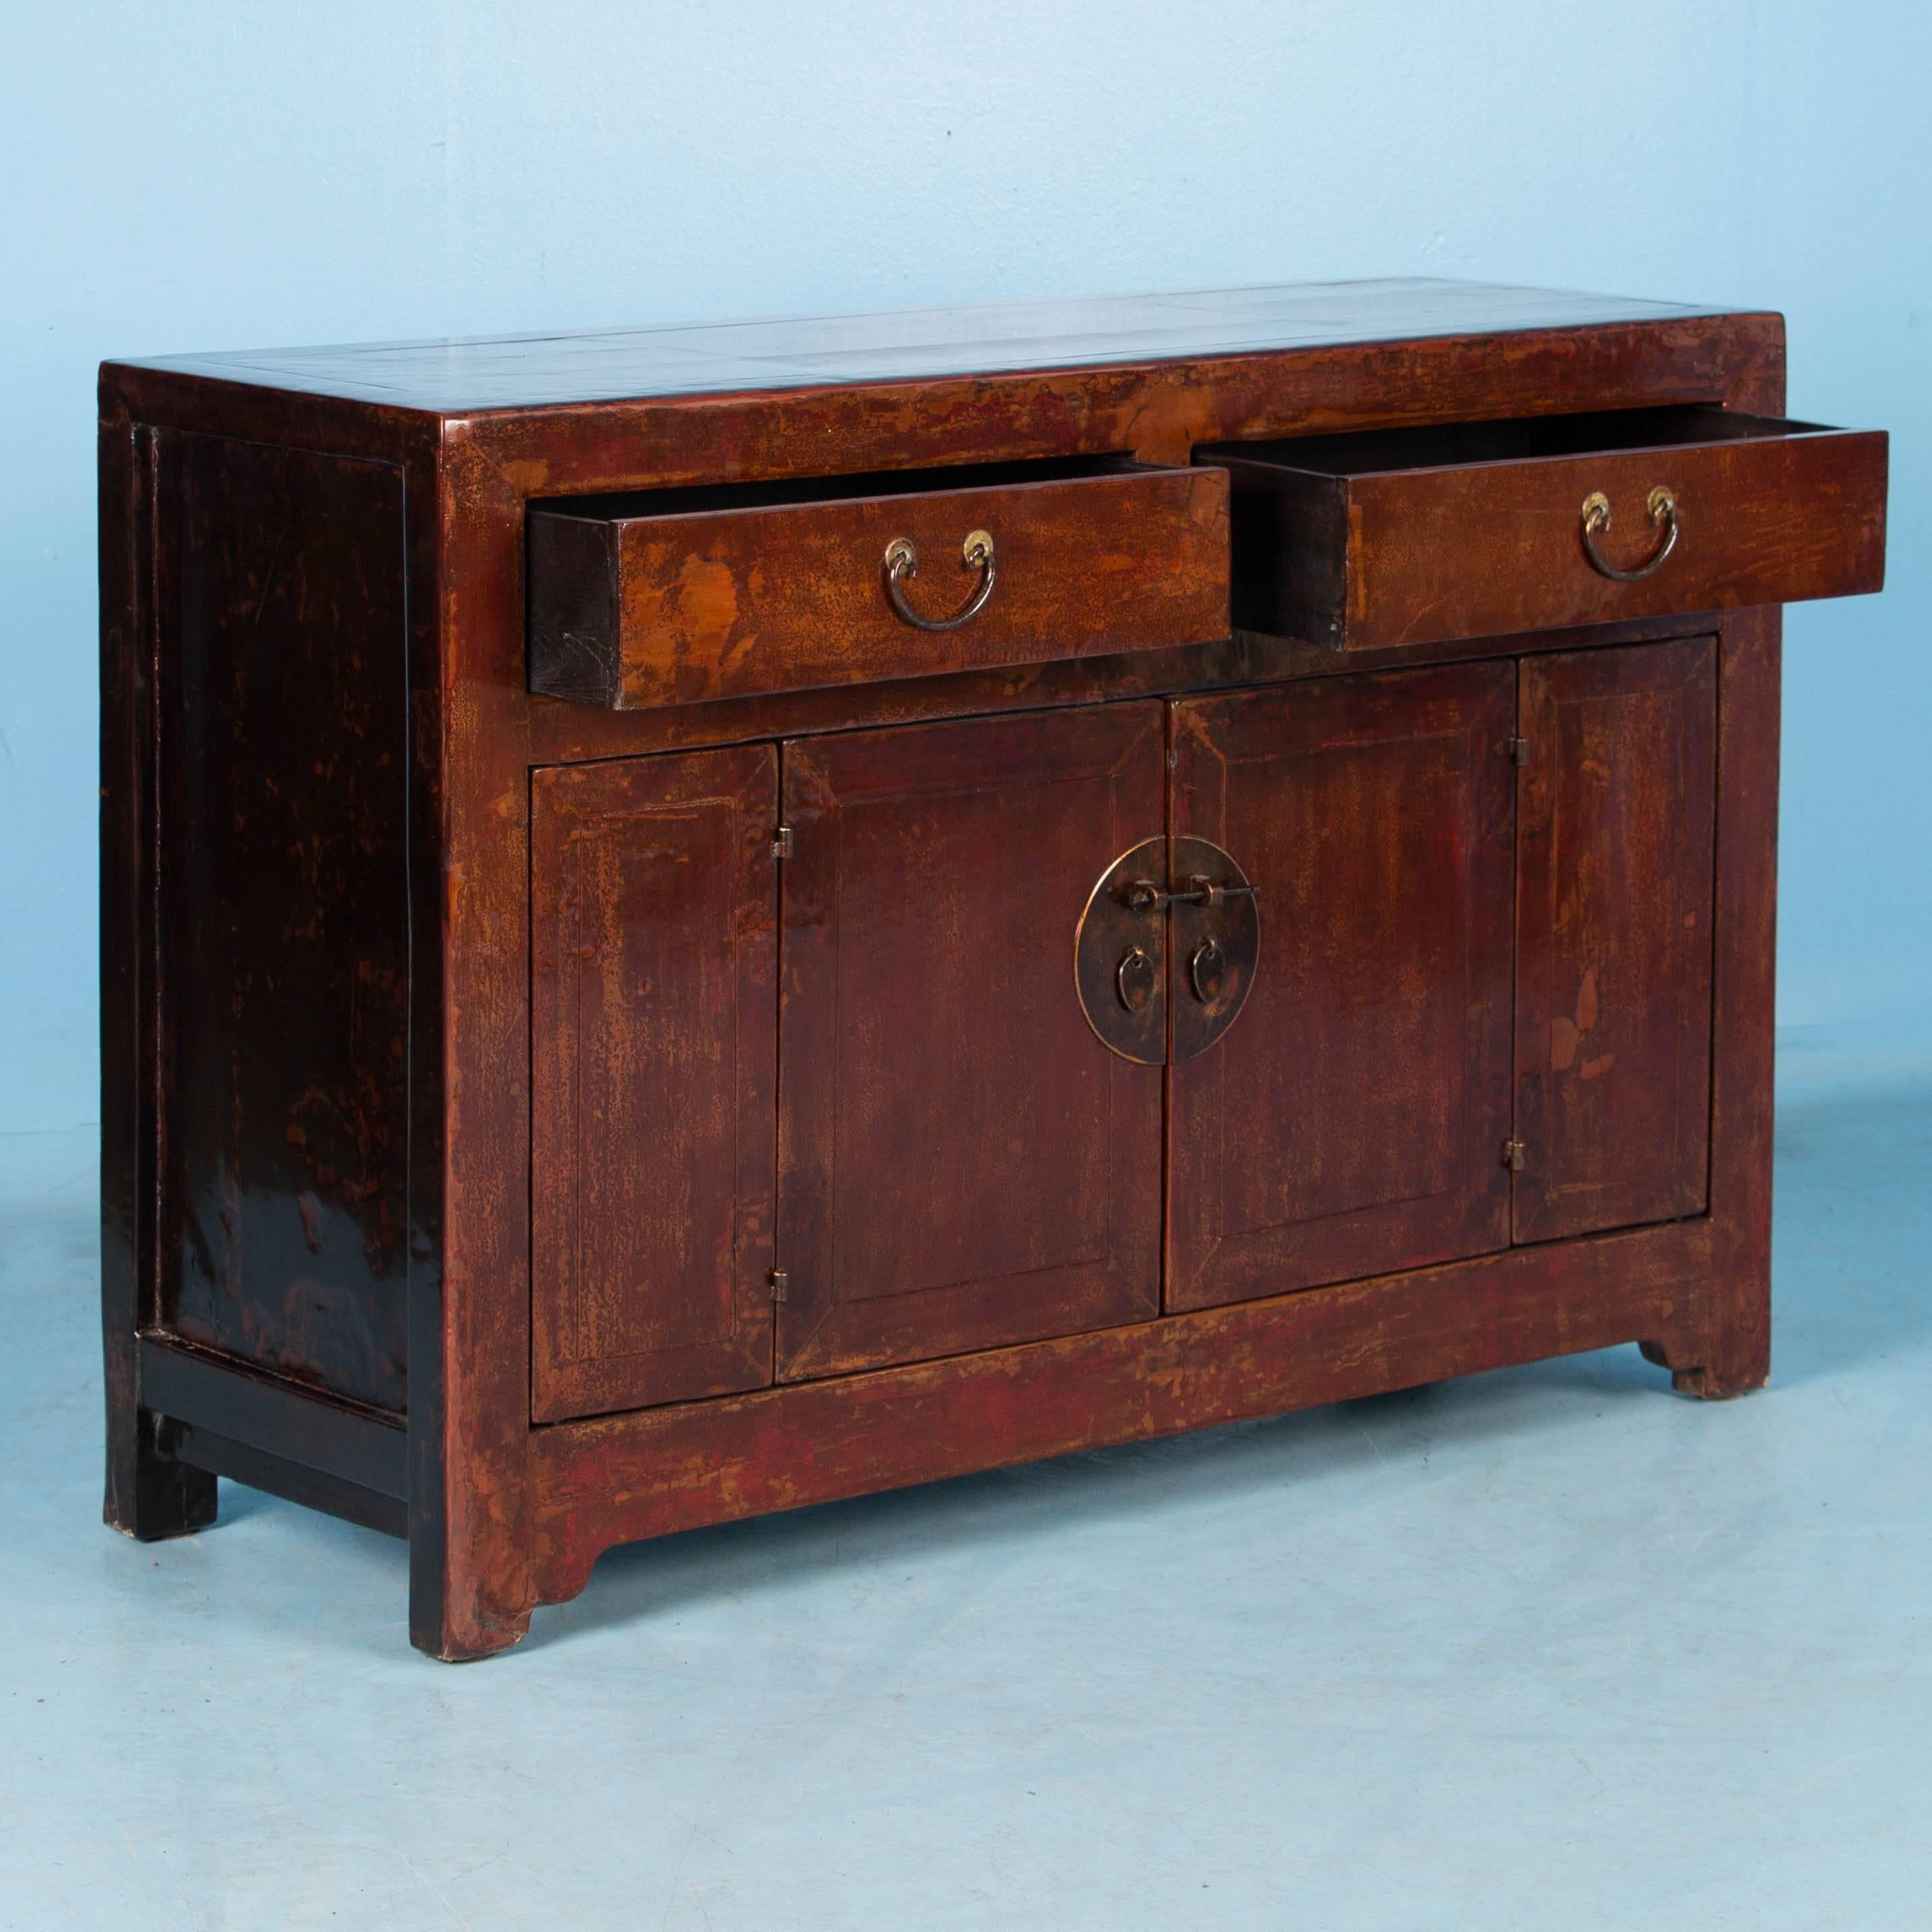 Beautiful and versatile, this painted Chinese lacquered cabinet has a lovely aged patina with hints of lighter red and amber beneath a time worn, dark red paint whispering of years gone by. The lacquered finish is highly polished giving the paint